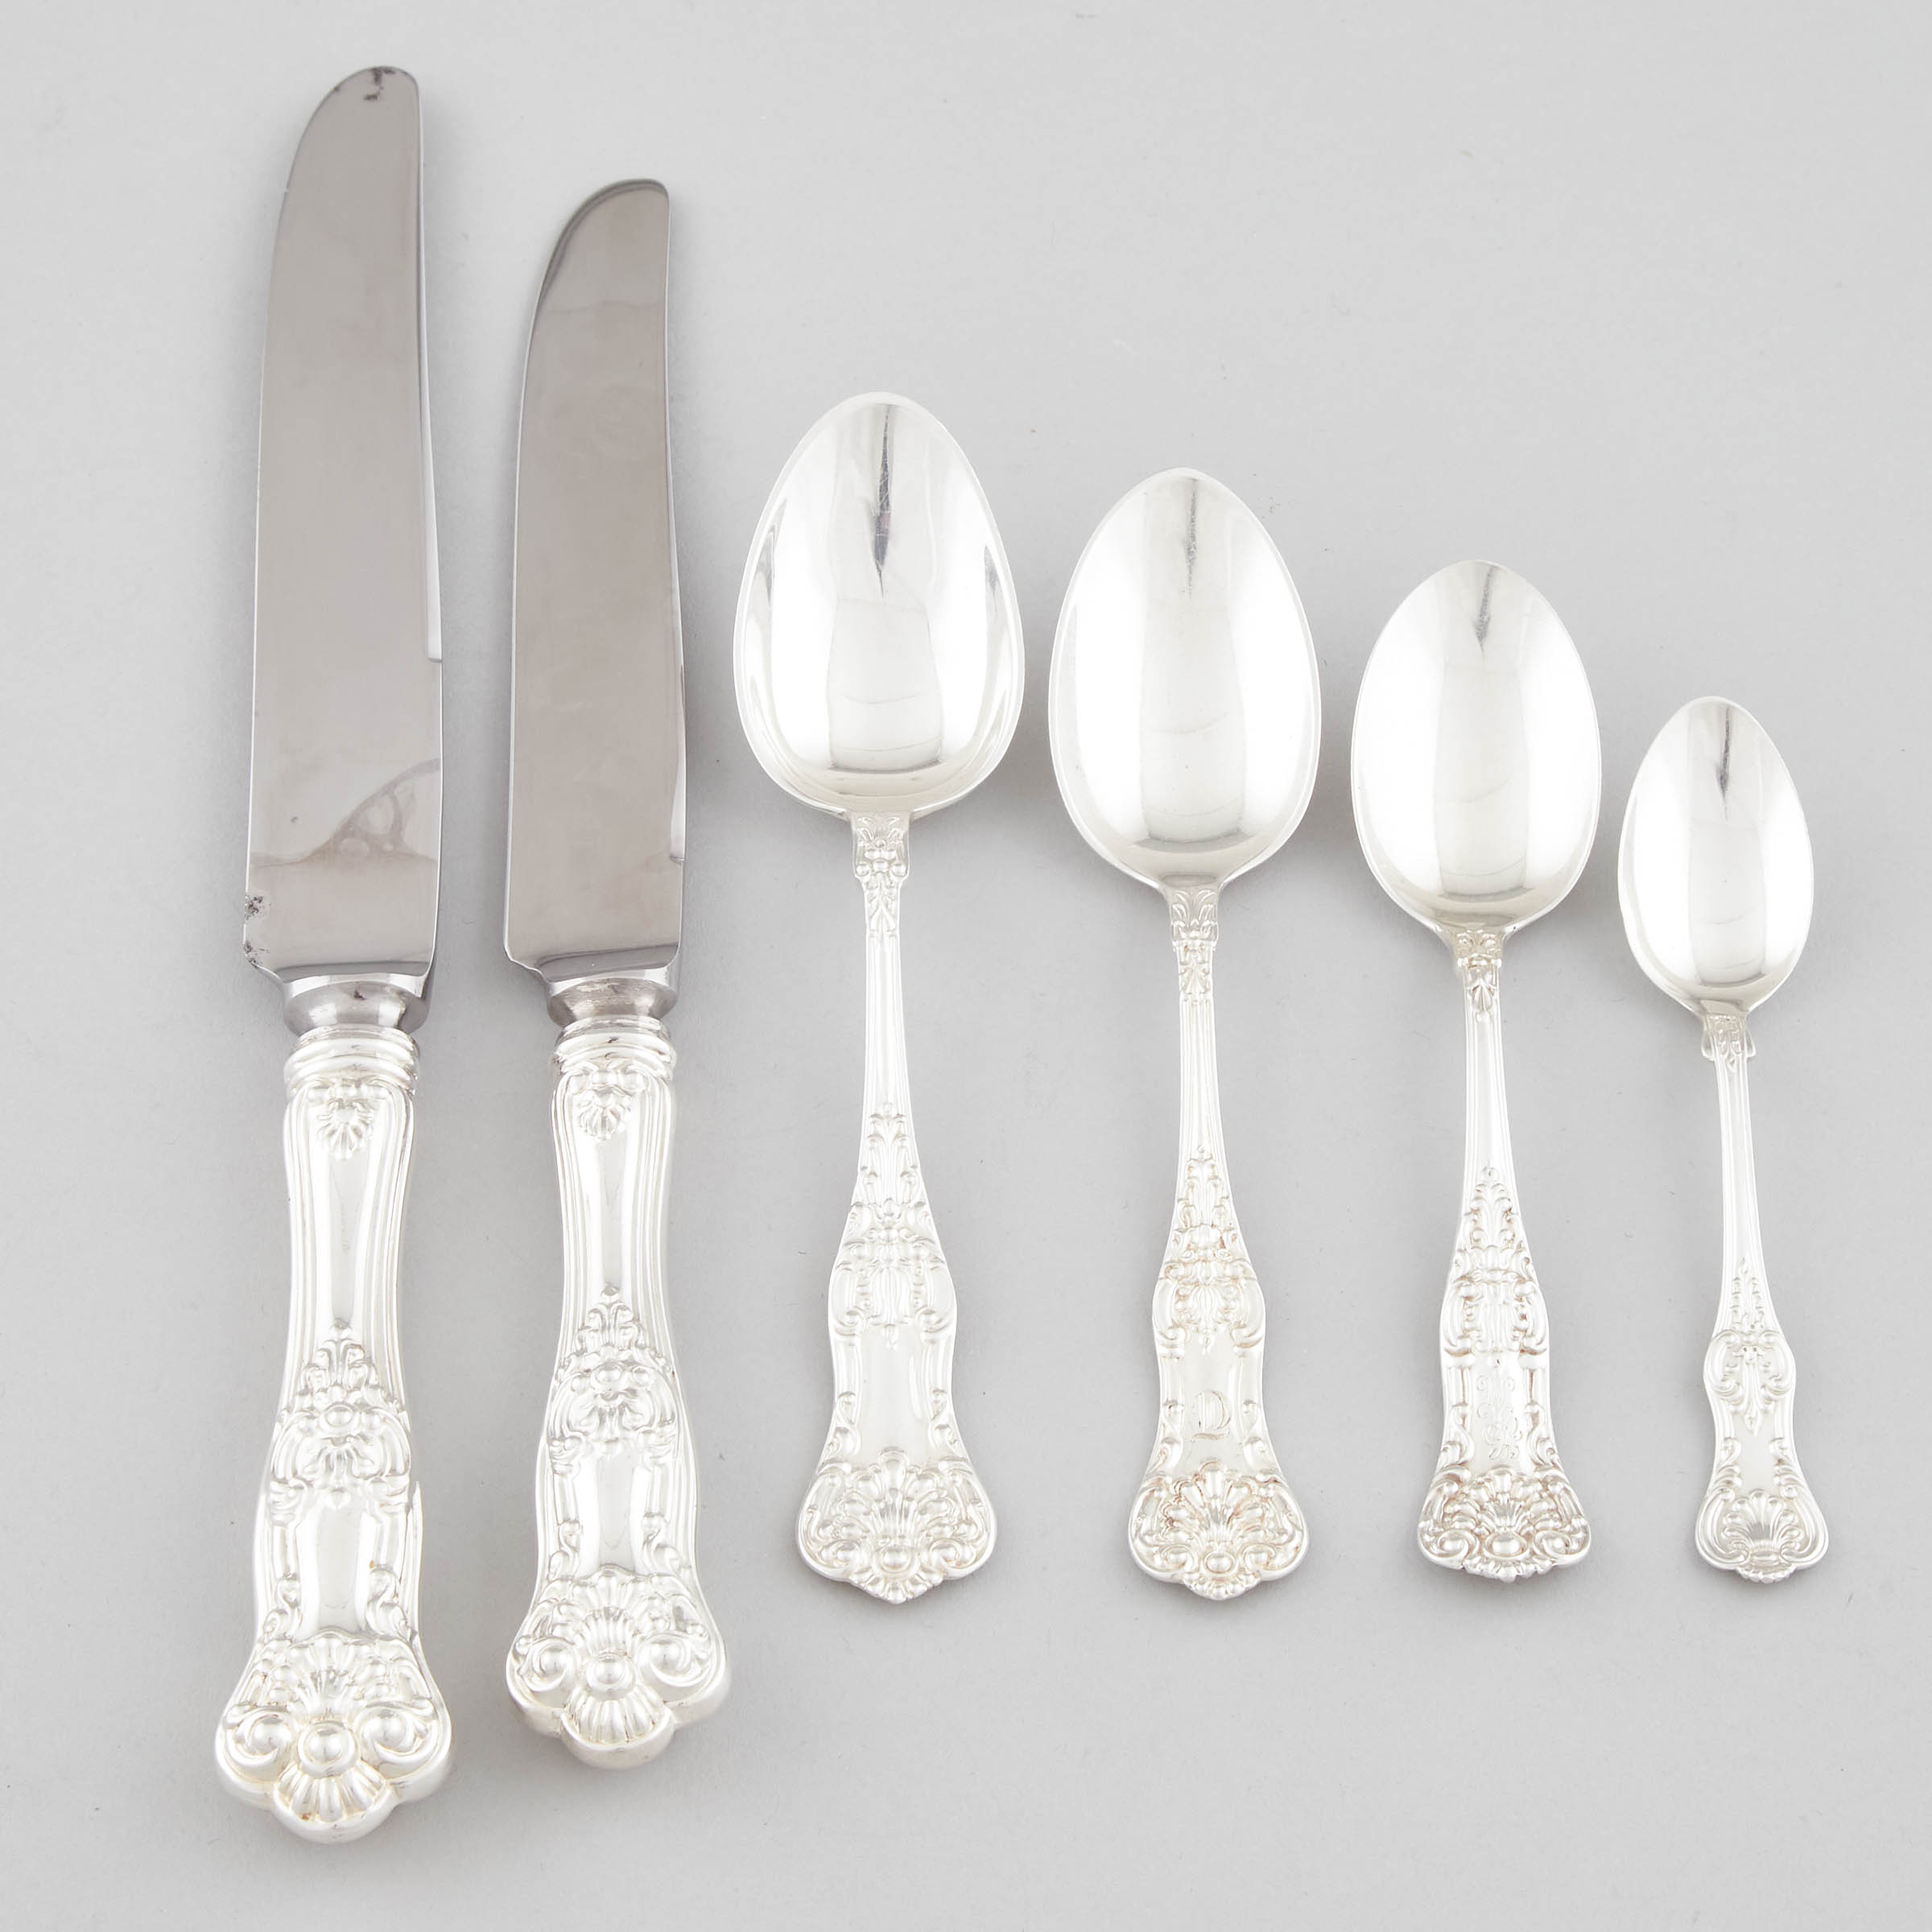 Canadian Silver Queens Pattern 2fb0939